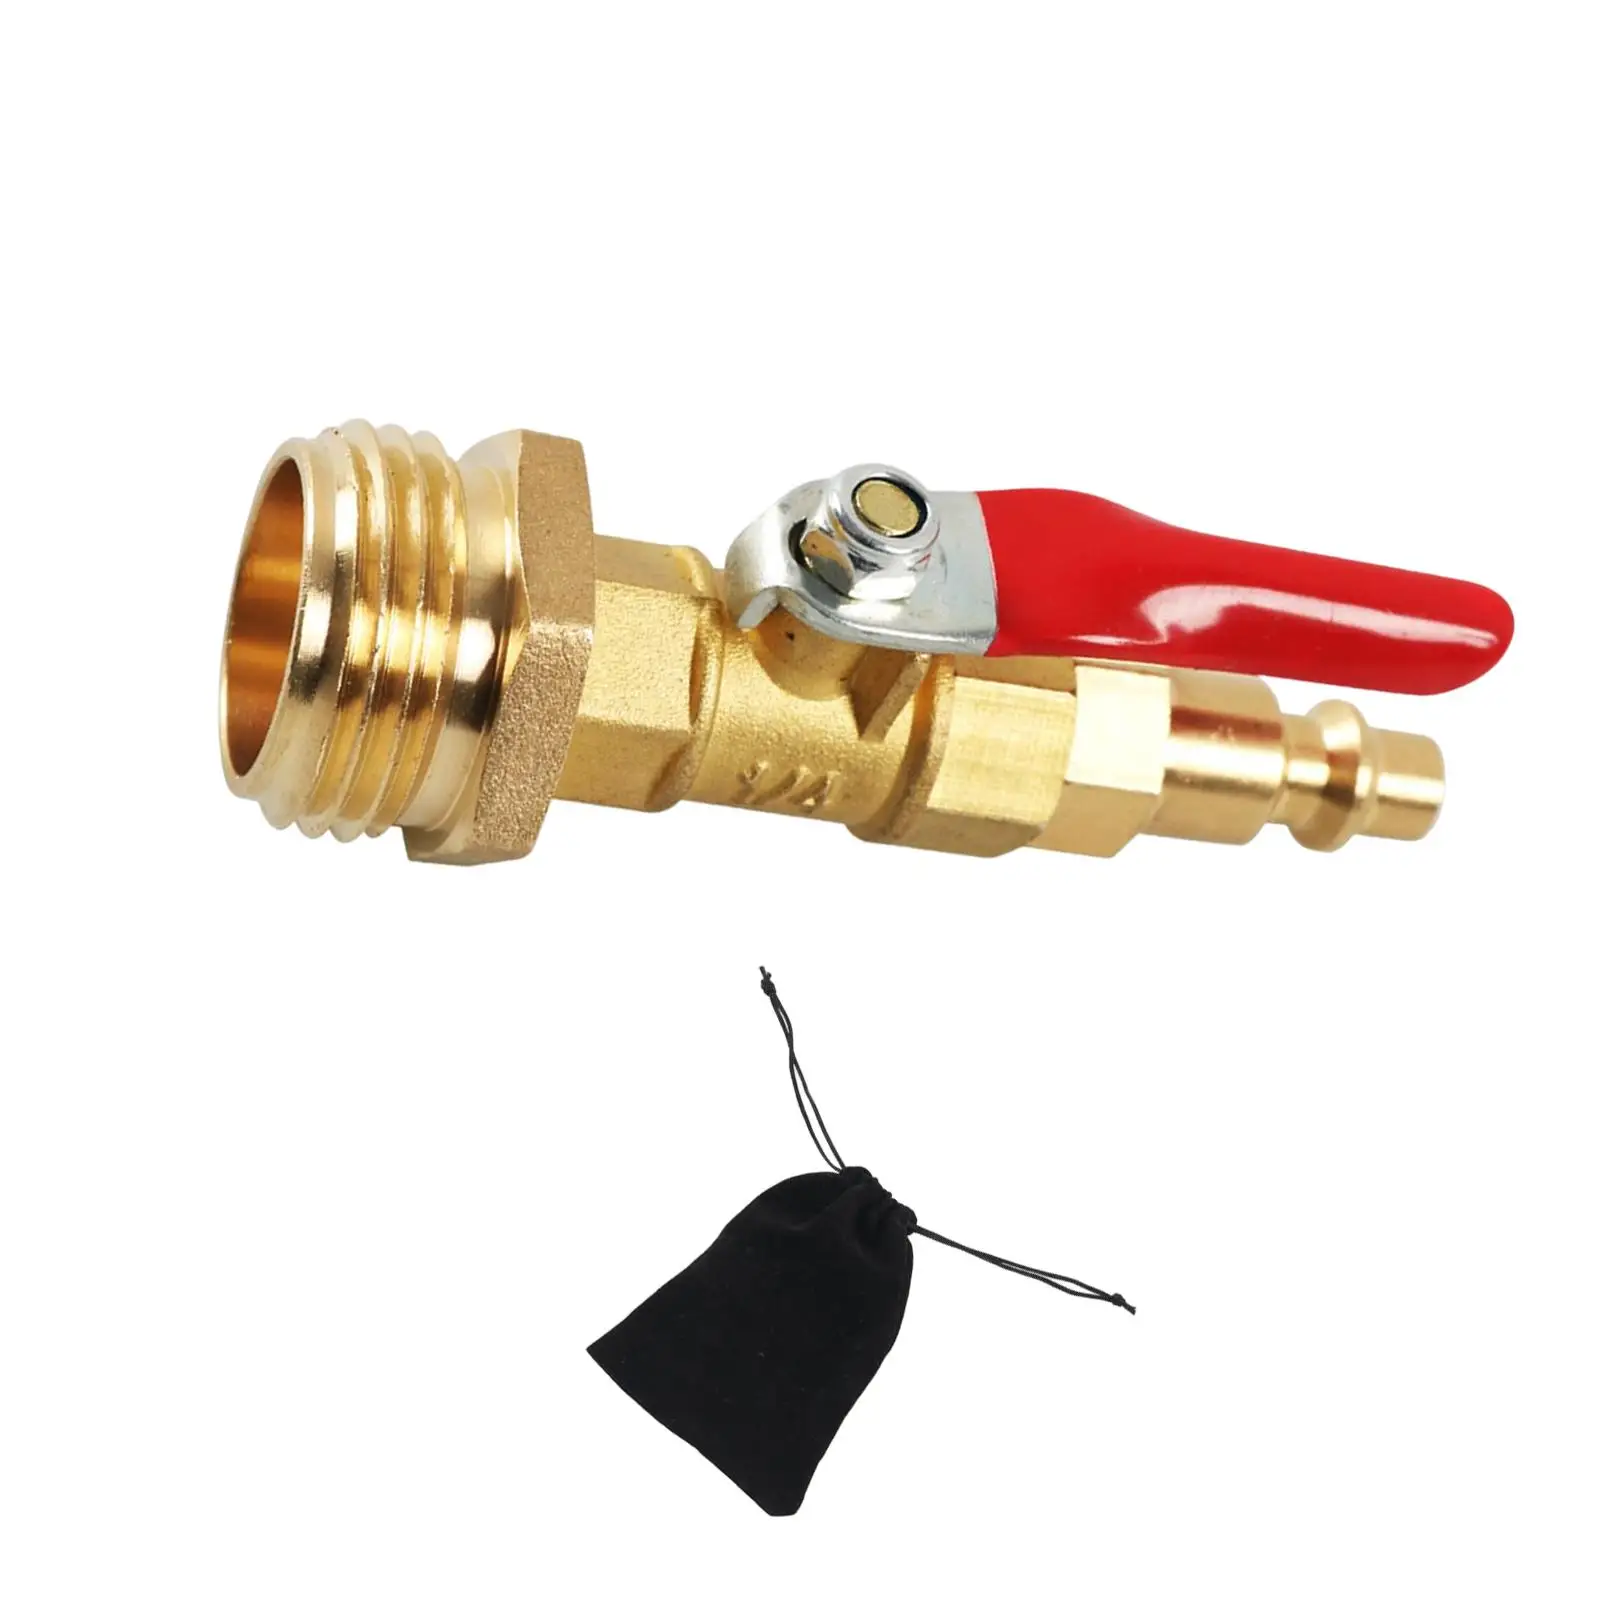 Winterize Blowout Adapter with 1/4 inch Male Quick Plug Brass Made Garden Hose Quick Connecting Plug for RV with Ball Valve